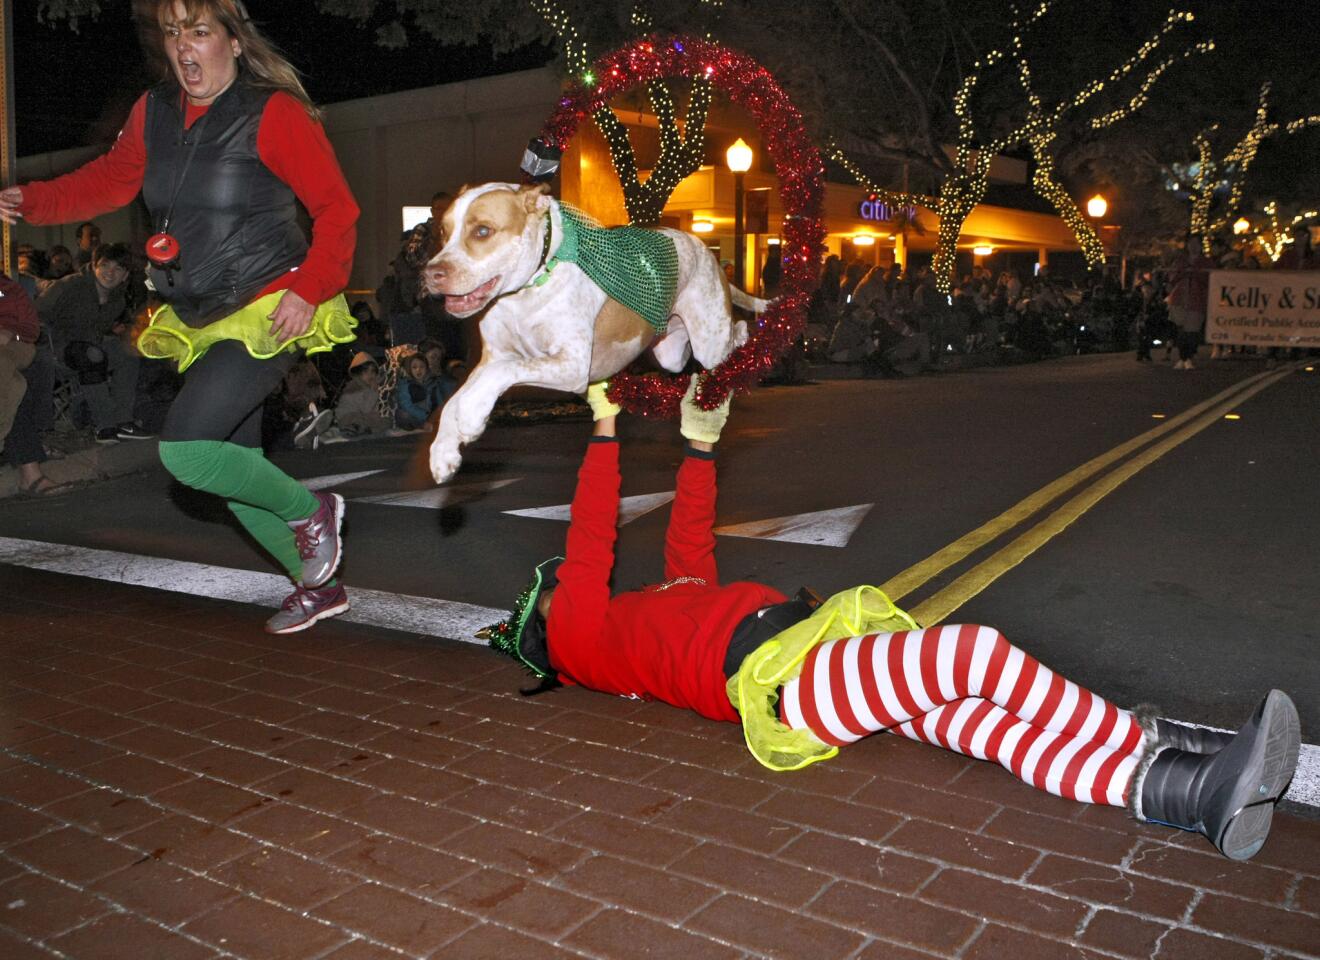 A dog named Rudy, from La Crescenta, jumps over a hoop at the annual Montrose - Glendale Christmas Parade, on Honolulu Ave. in Montrose, on Saturday, Dec. 3, 2016.